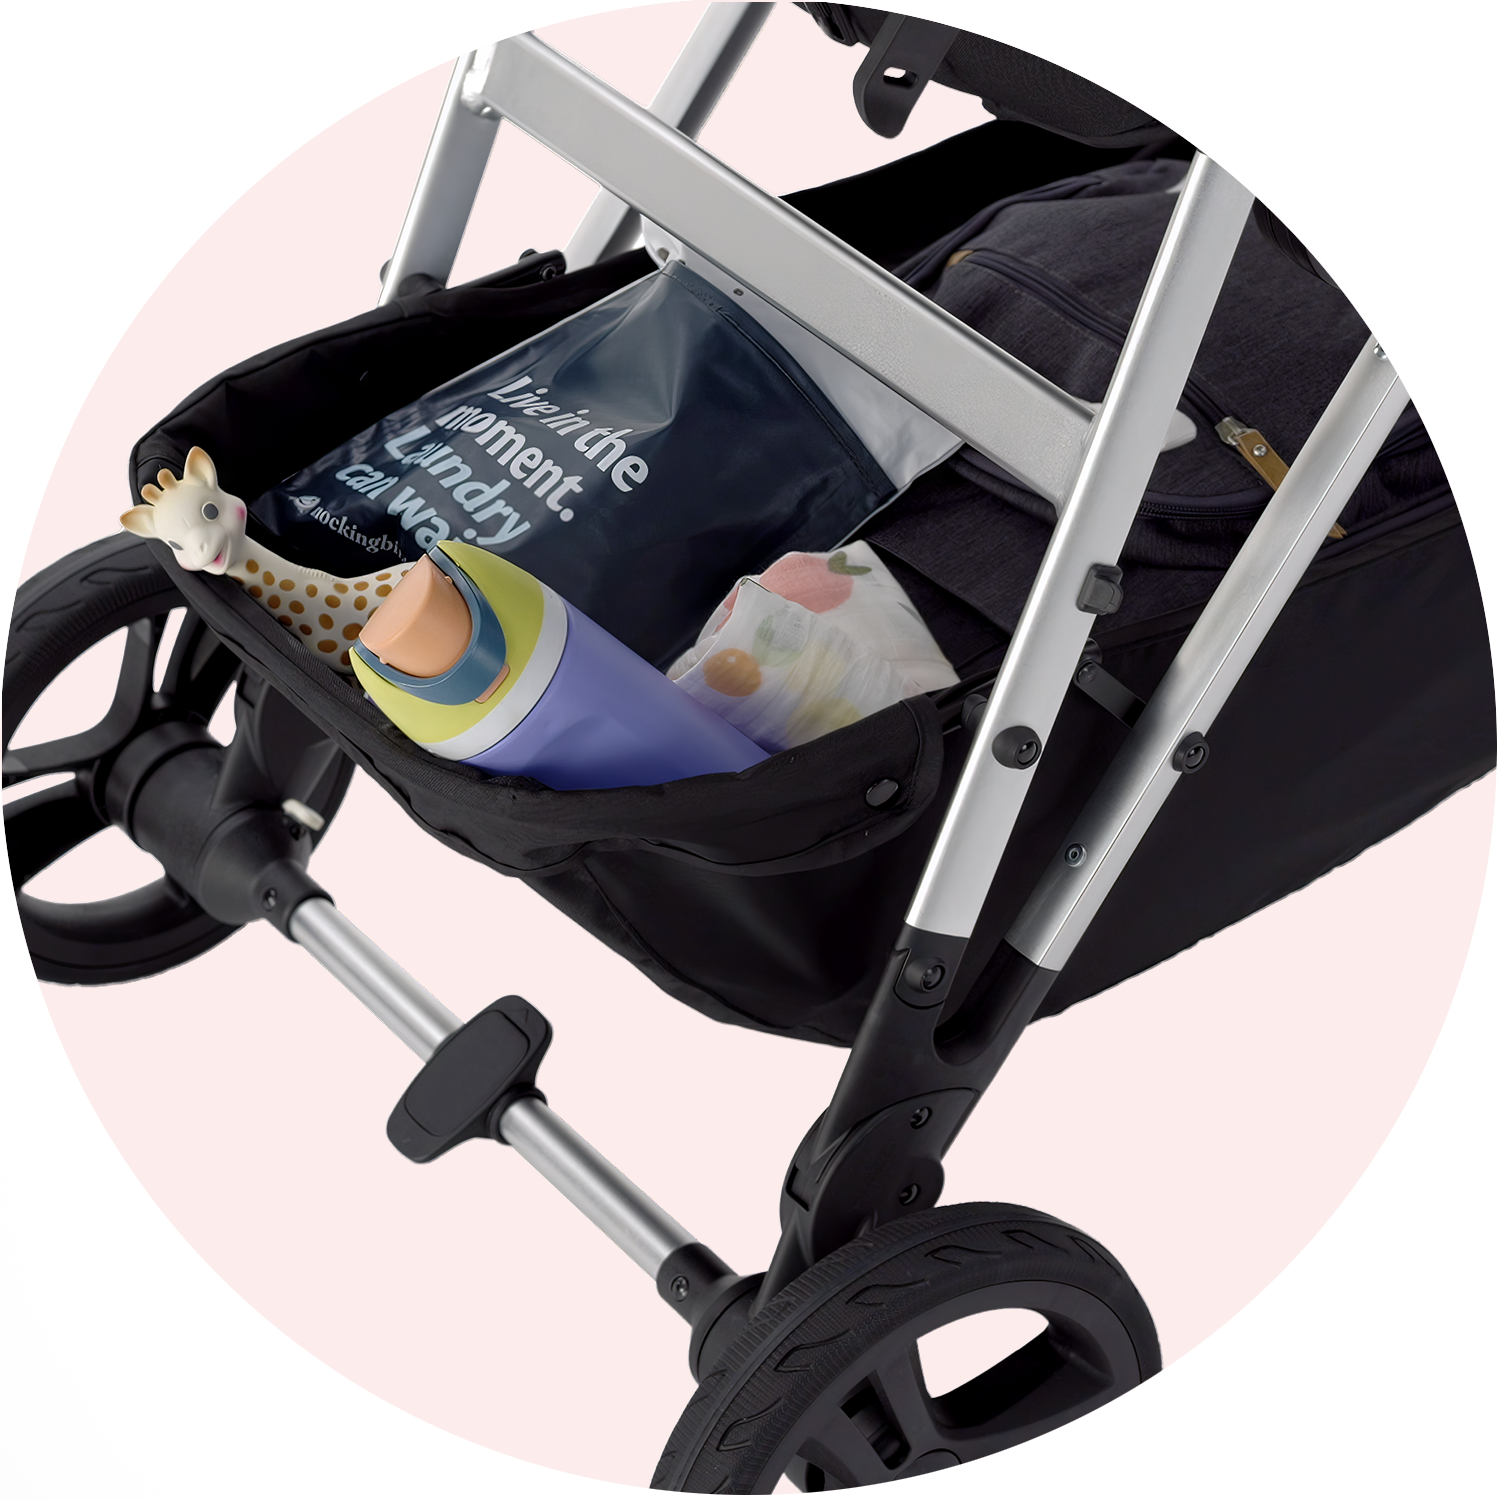 Underneath of a baby stroller showing a storage compartment filled with a baby bottle, a stuffed giraffe toy, and a bag of baby wipes.